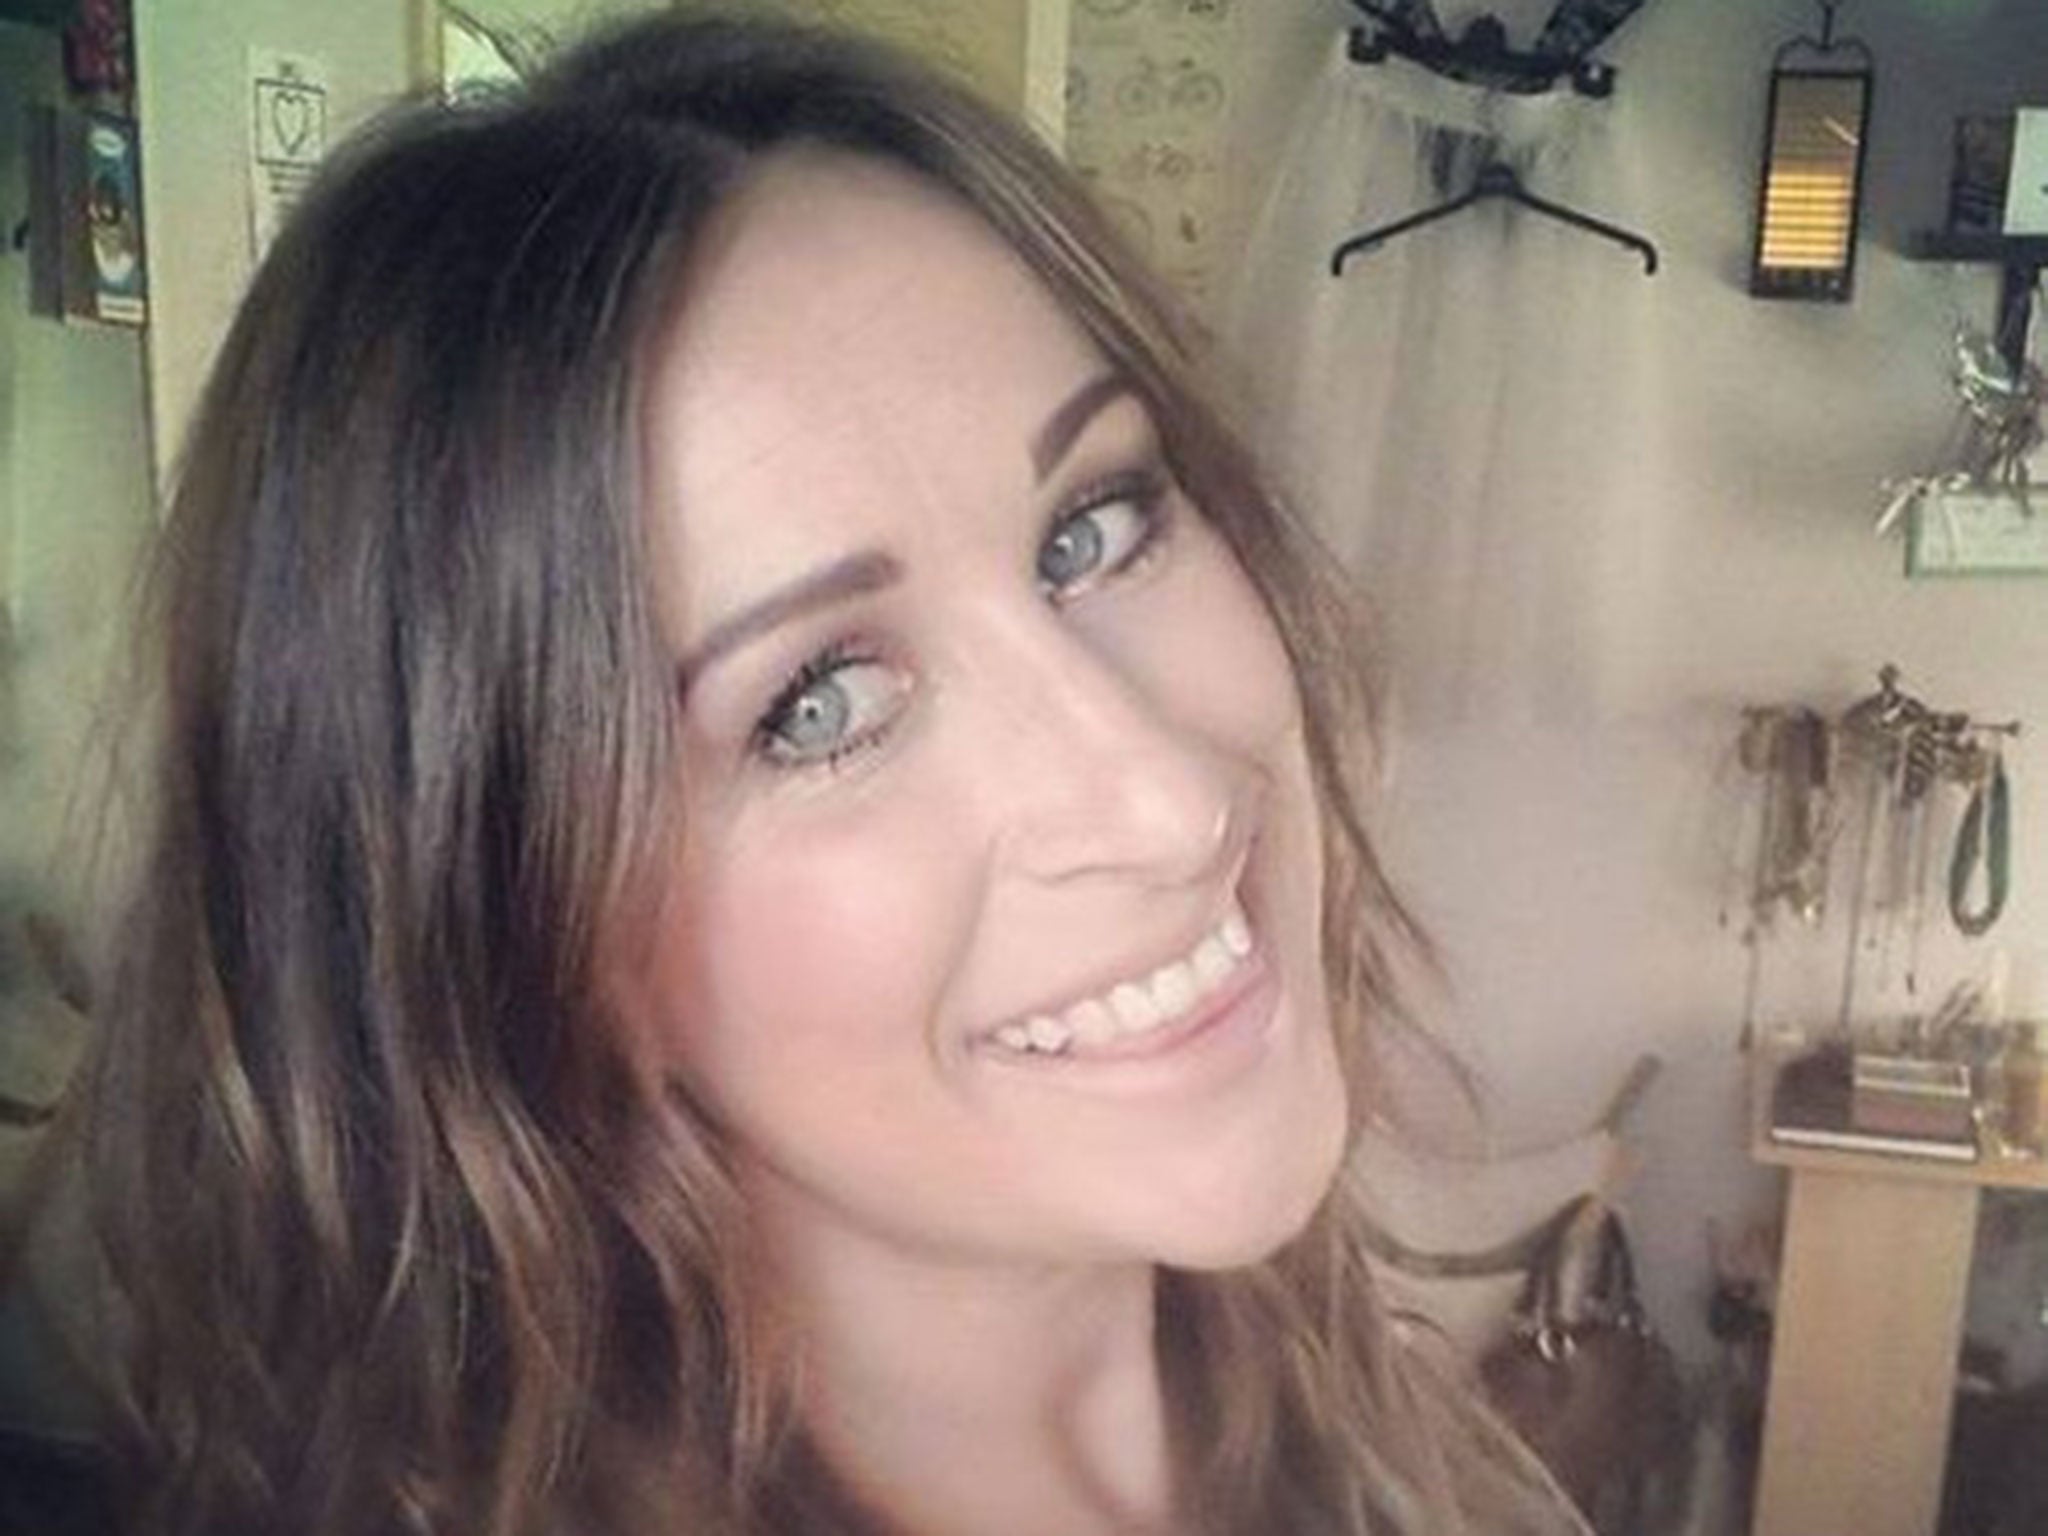 Dating blogger Lauren Crouch asked the man if she could donate the money to charity instead